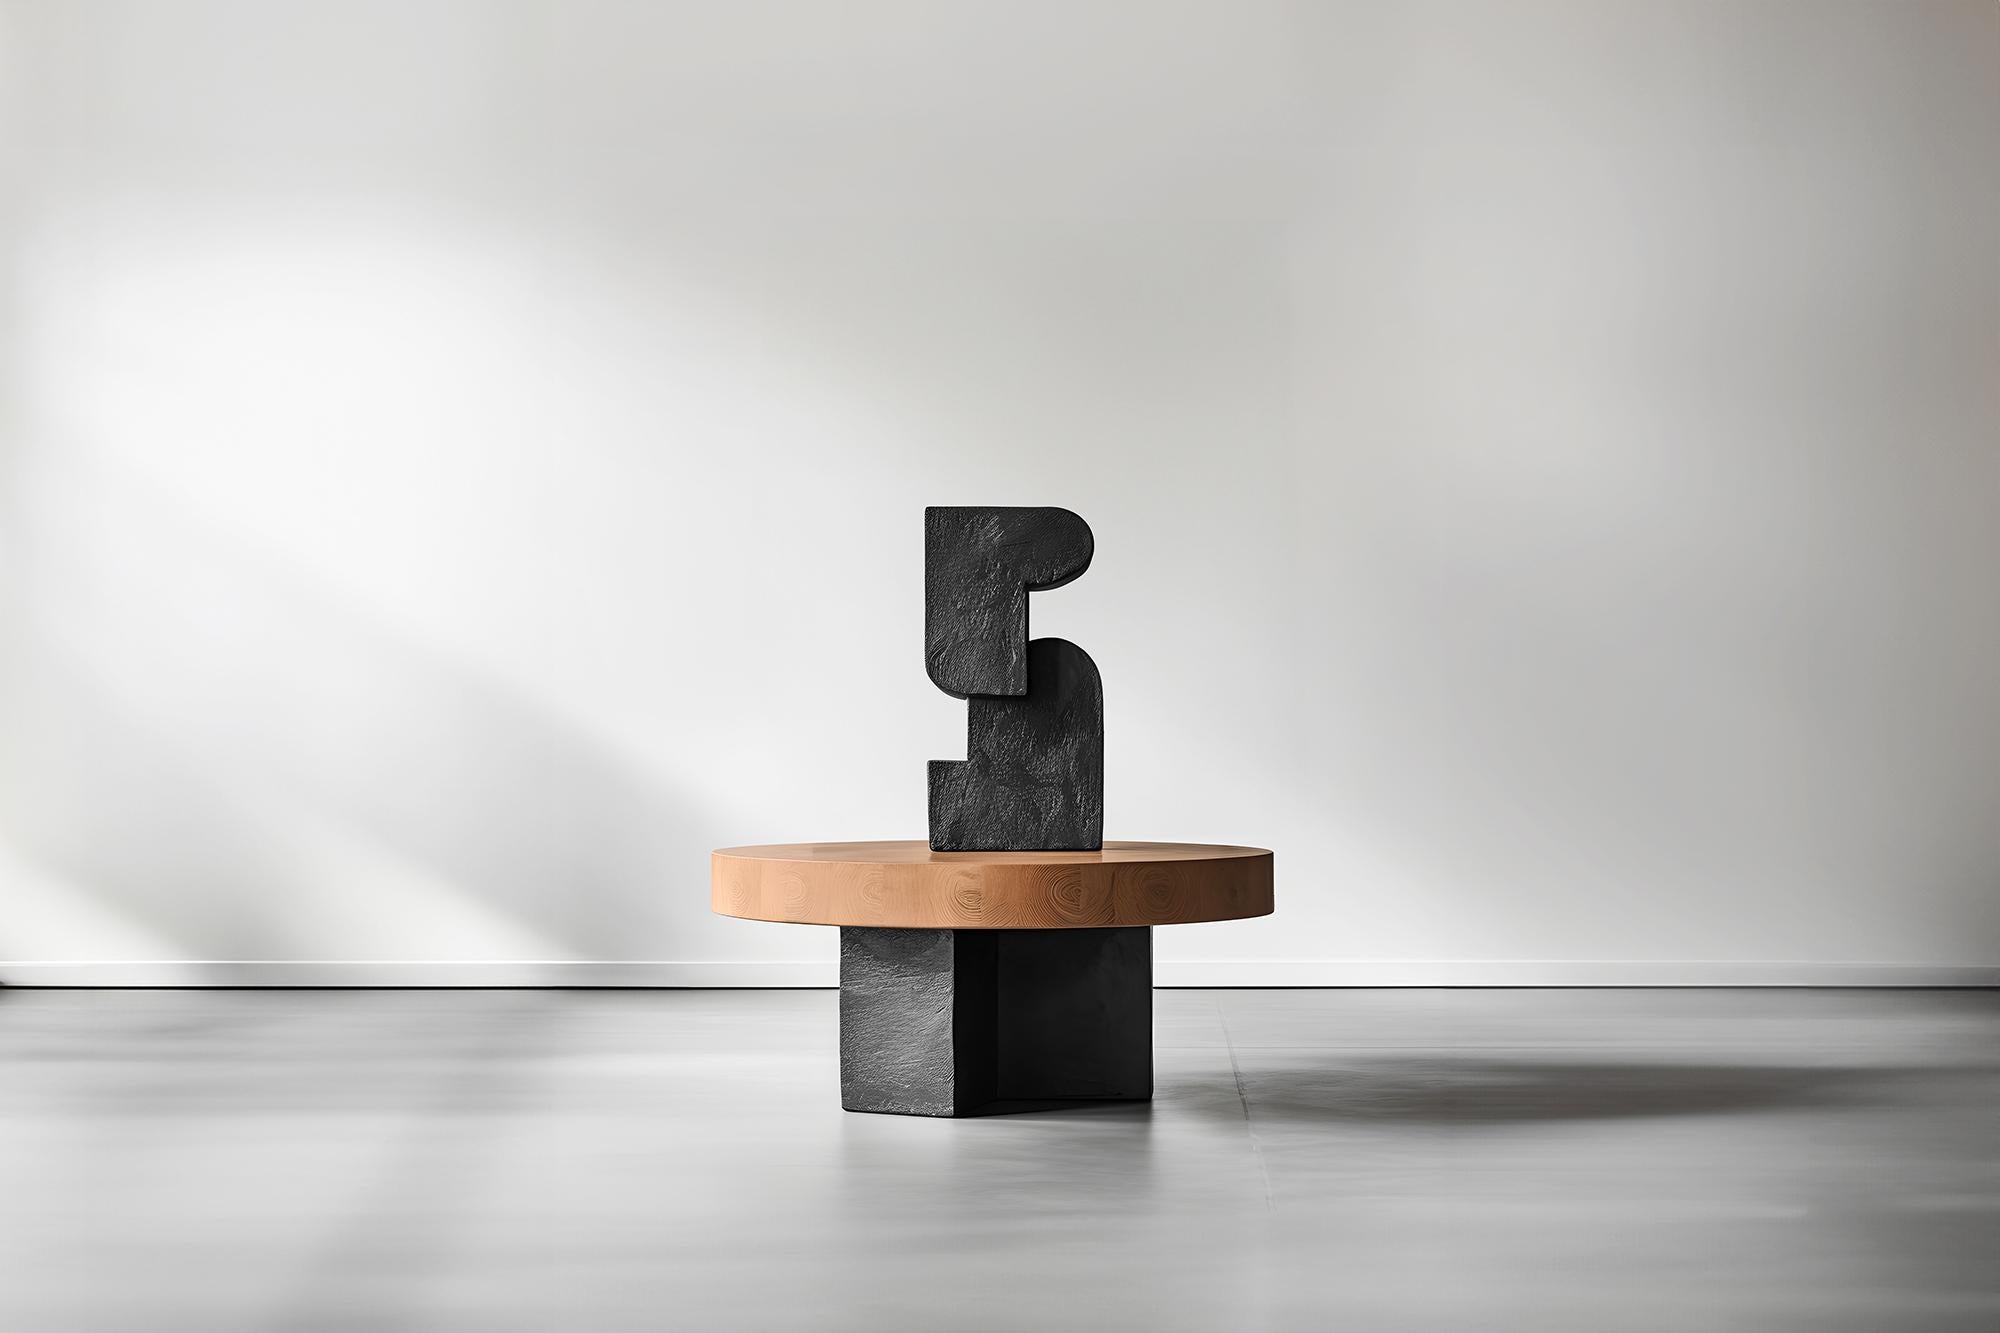 Sculptural Solid Oak Unseen Force #40 Joel Escalona's Table, Art Decor


Sculptural coffee table made of solid wood with a natural water-based or carbonized finish. Due to the nature of the production process, each piece may vary in grain, texture,